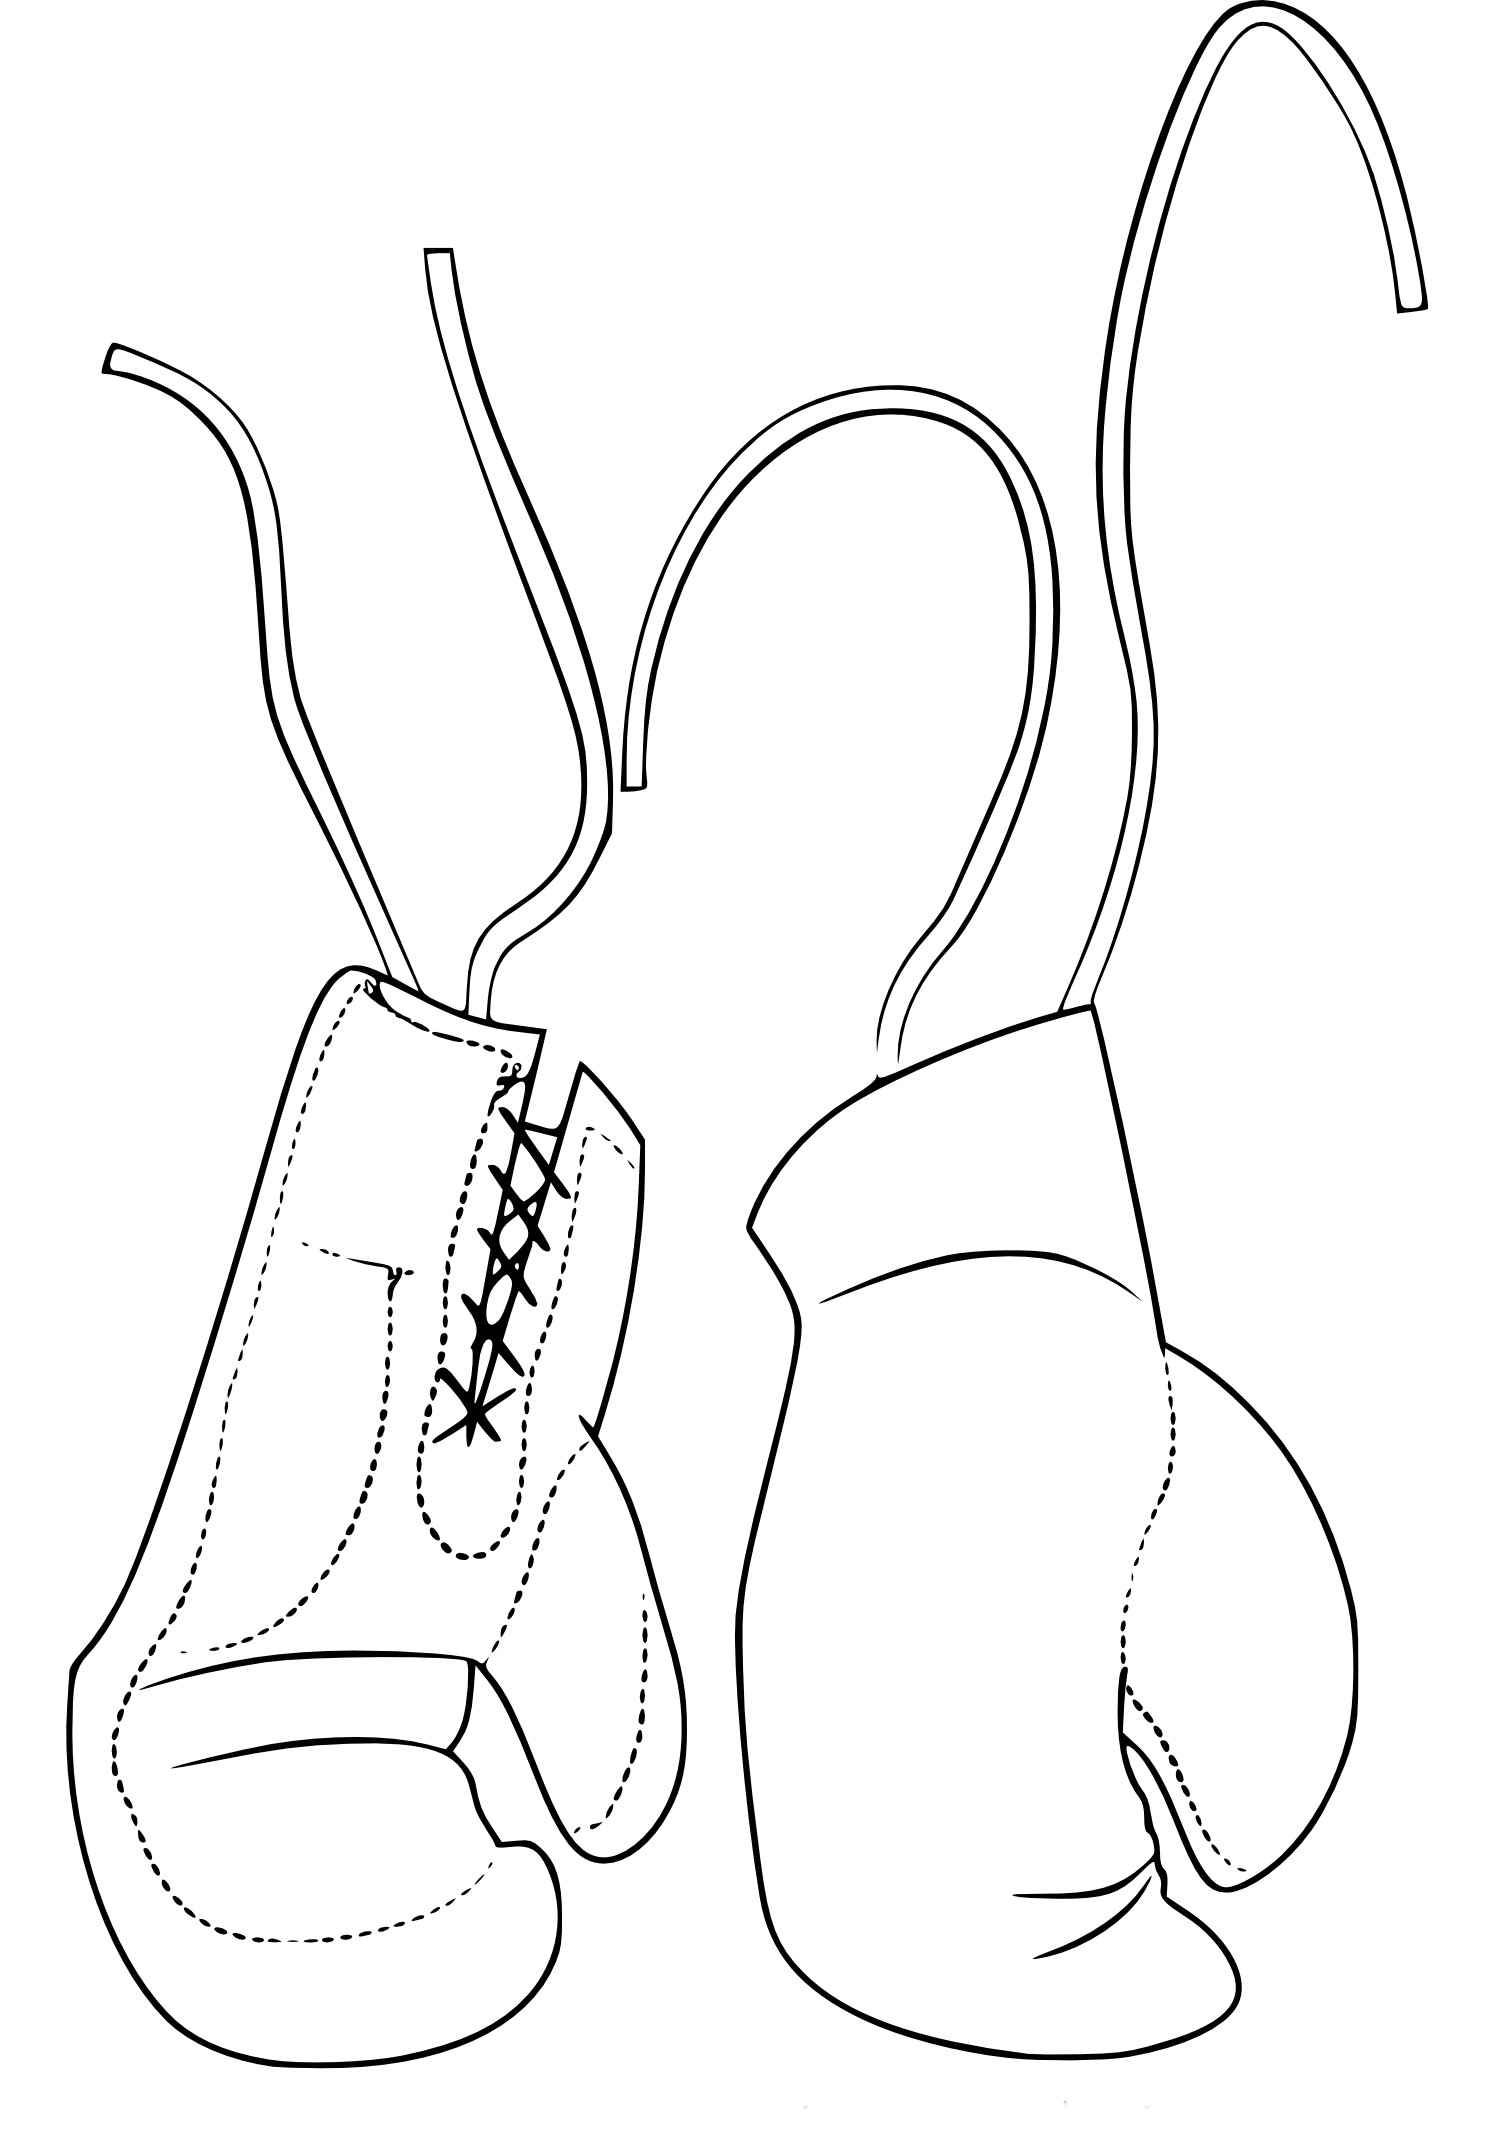 Boxing Gloves coloring page